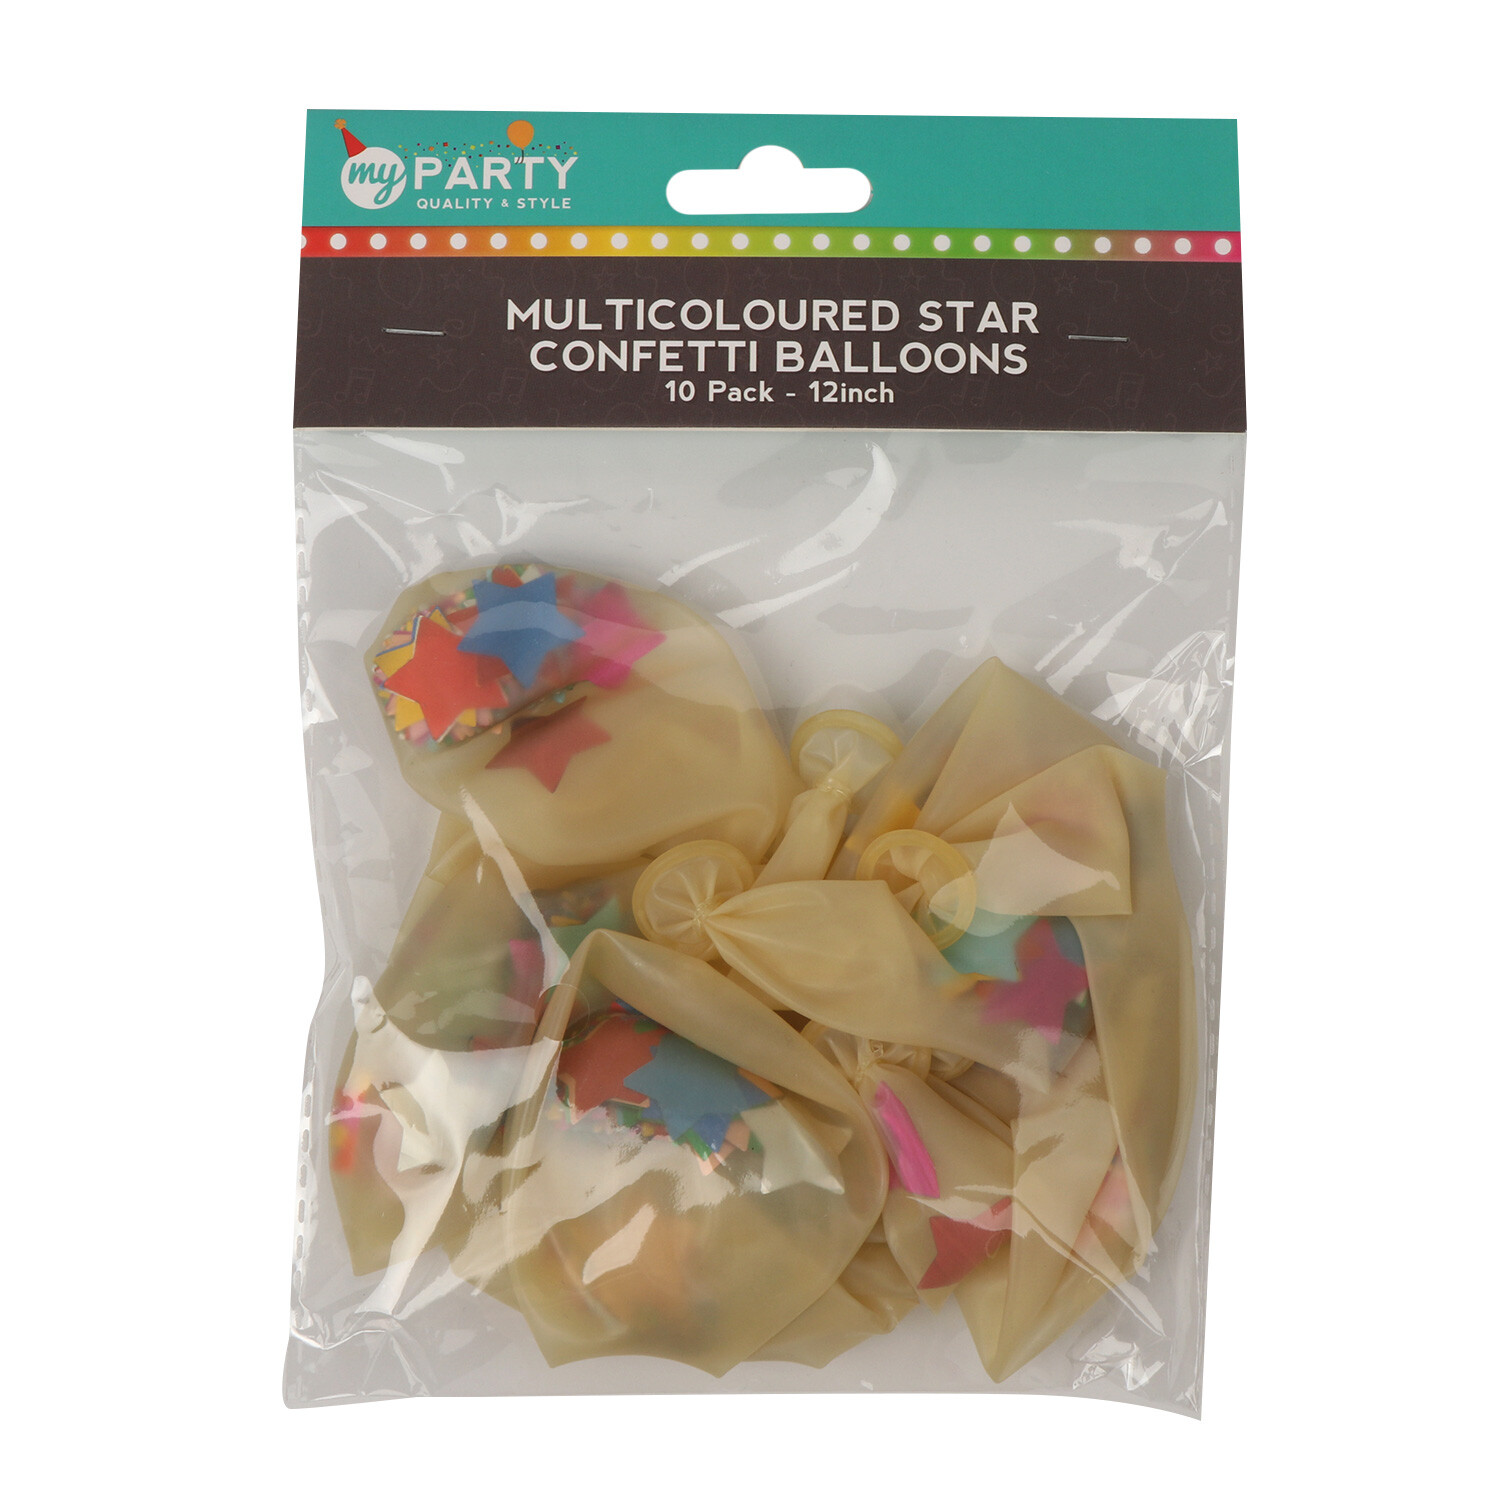 Pack of 10 Star Confetti Balloons - Multicoloured Image